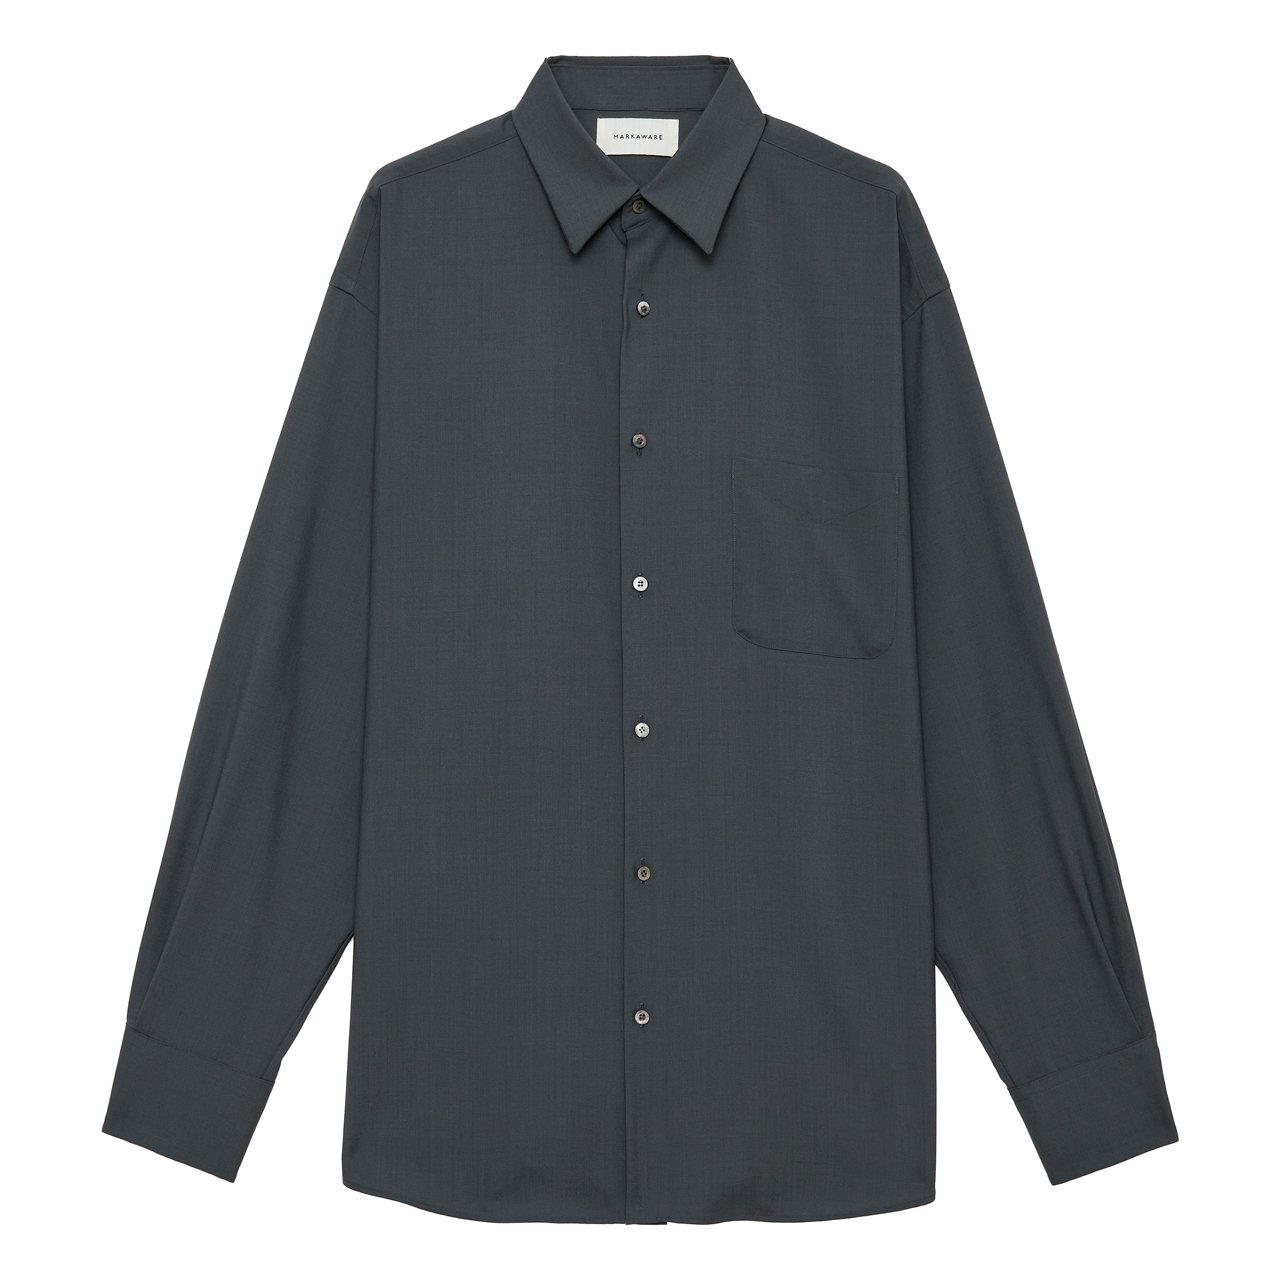 <img class='new_mark_img1' src='https://img.shop-pro.jp/img/new/icons5.gif' style='border:none;display:inline;margin:0px;padding:0px;width:auto;' />MARKAWARE (ޡ)COMFORT FIT SHIRT OLIVE -ORGANIC WOOL 2/80 TROPICAL-